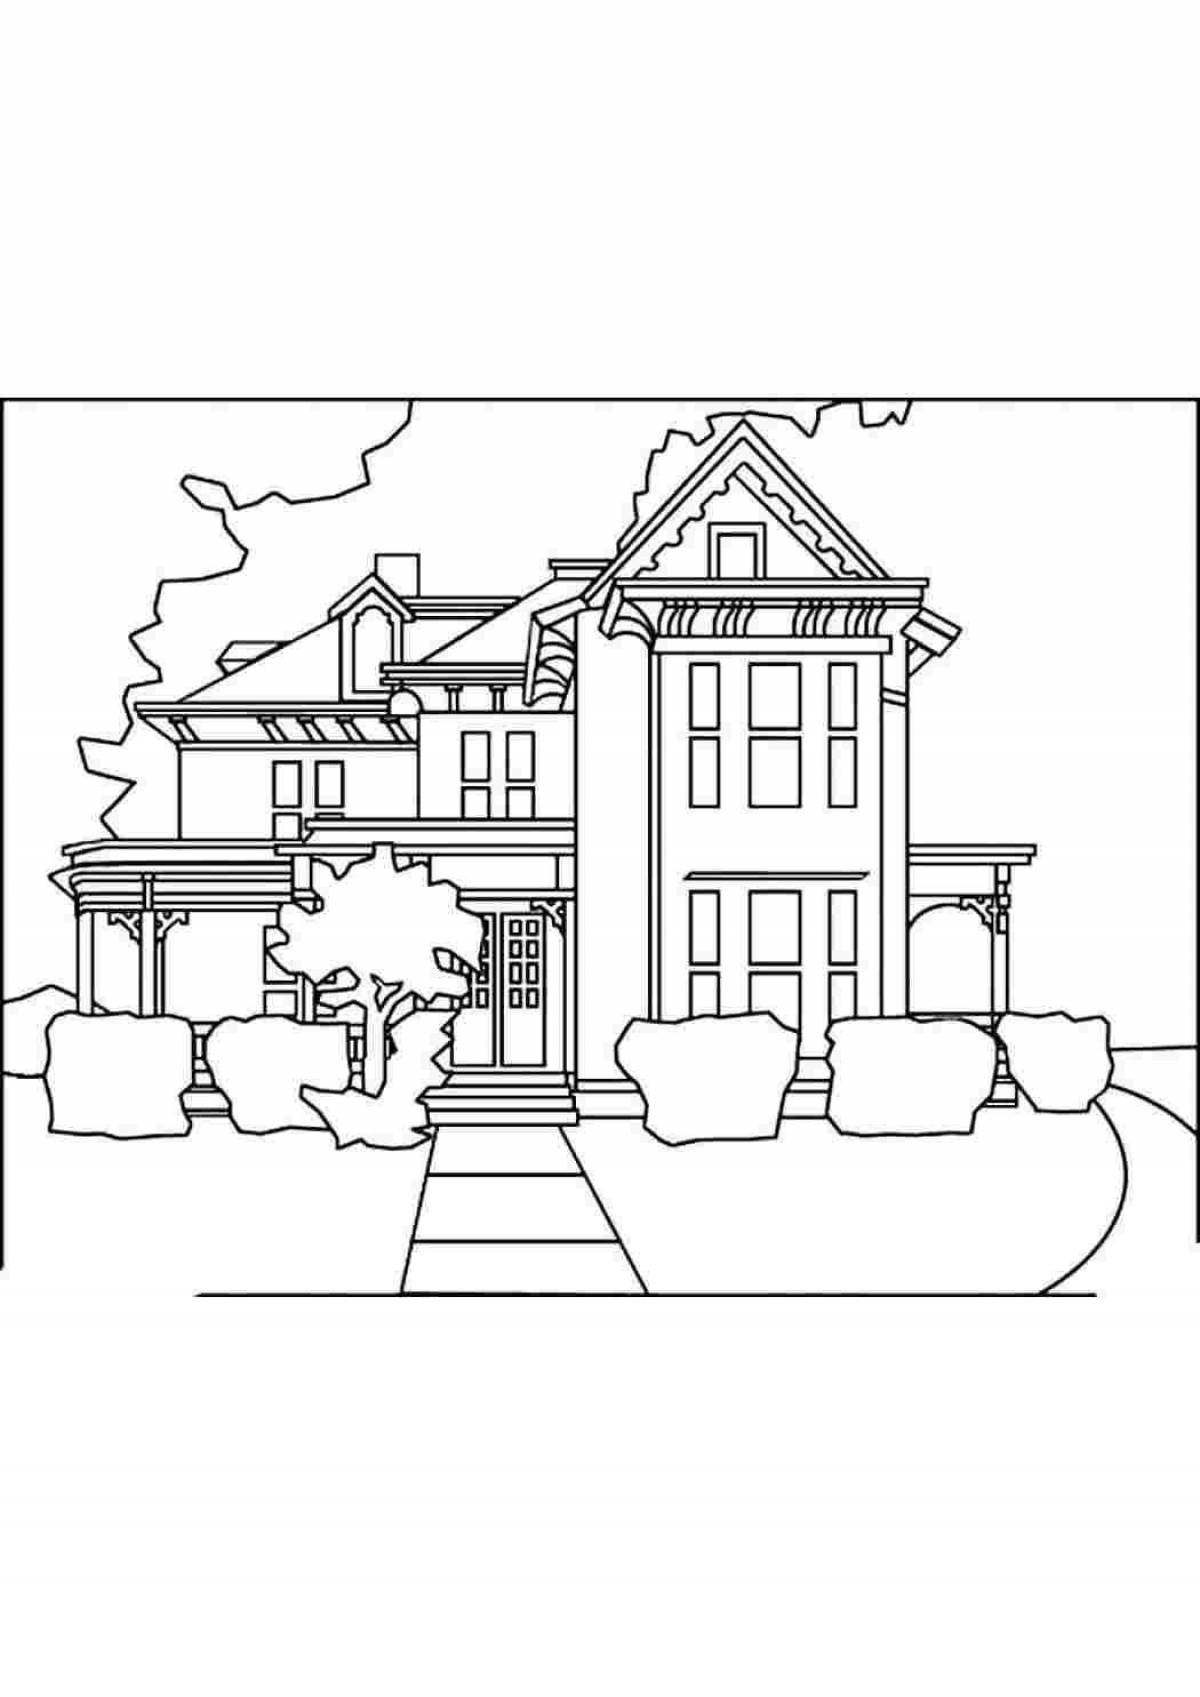 Coloring page stately modern house